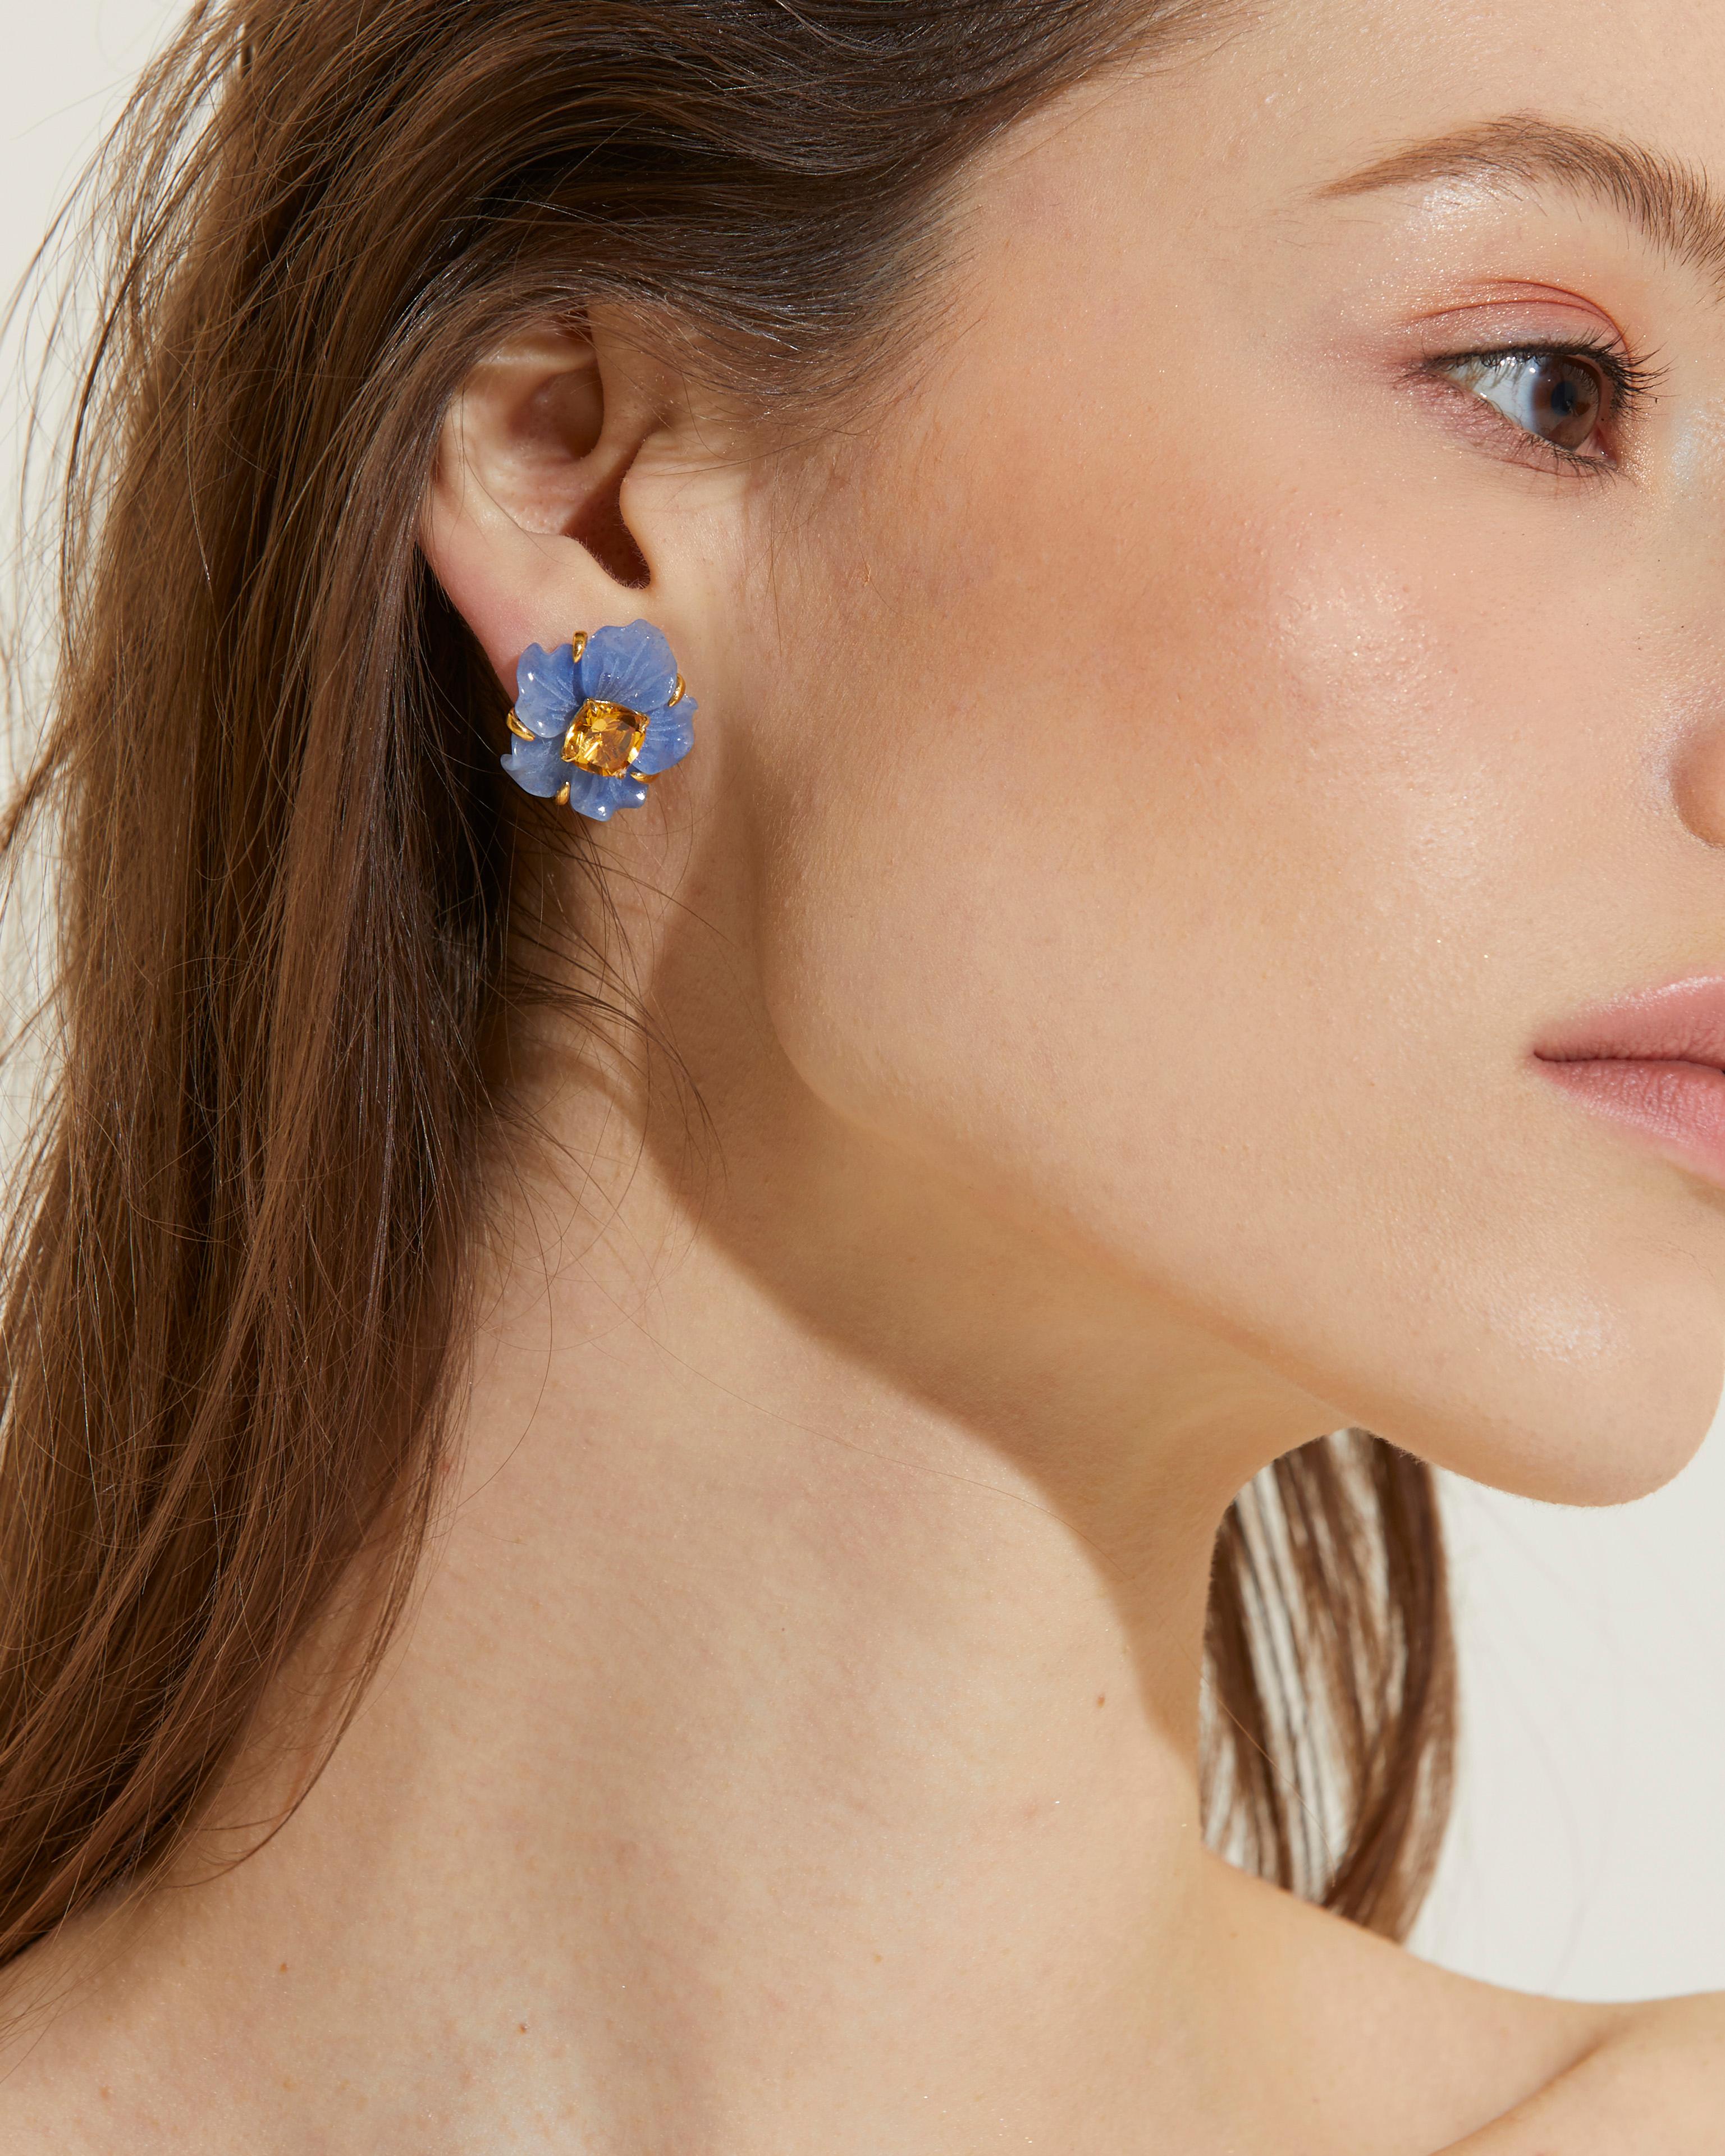 Elegant 24mm Carved Dumortierite Flower and Cushion Citrine Vermeil Earrings

This gorgeous pair of earrings features 25mm dumortierite carved into beautiful three dimension flower, adorned with cushion-cut Brazilian citrine (3 carat size) in the